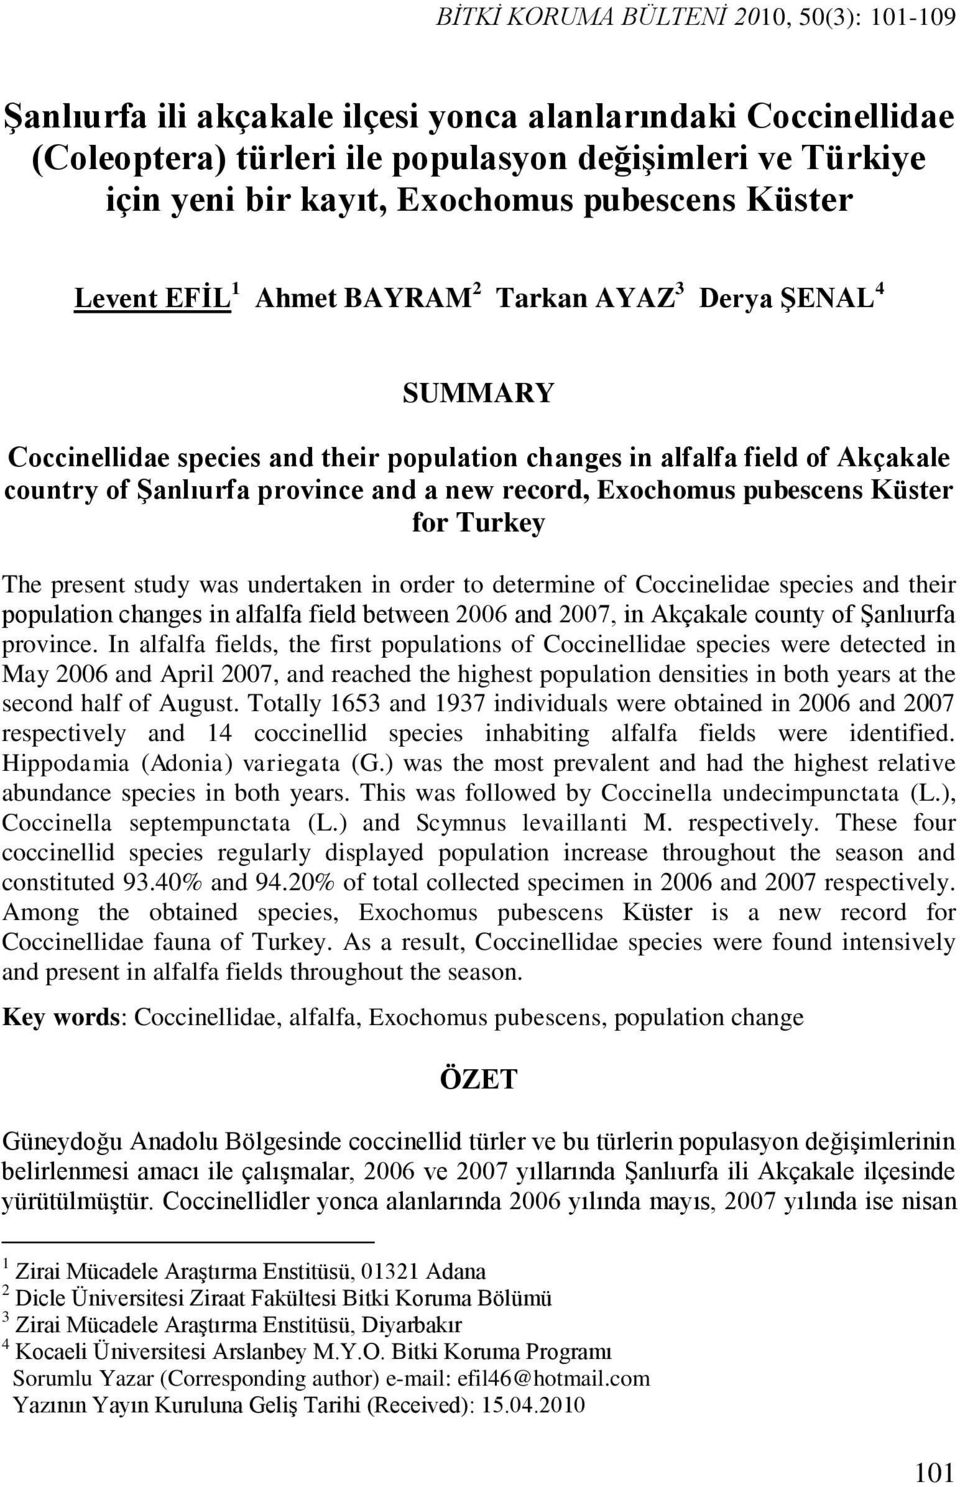 new record, Exochomus pubescens Küster for Turkey The present study was undertaken in order to determine of Coccinelidae species and their population changes in alfalfa field between 26 and 27, in